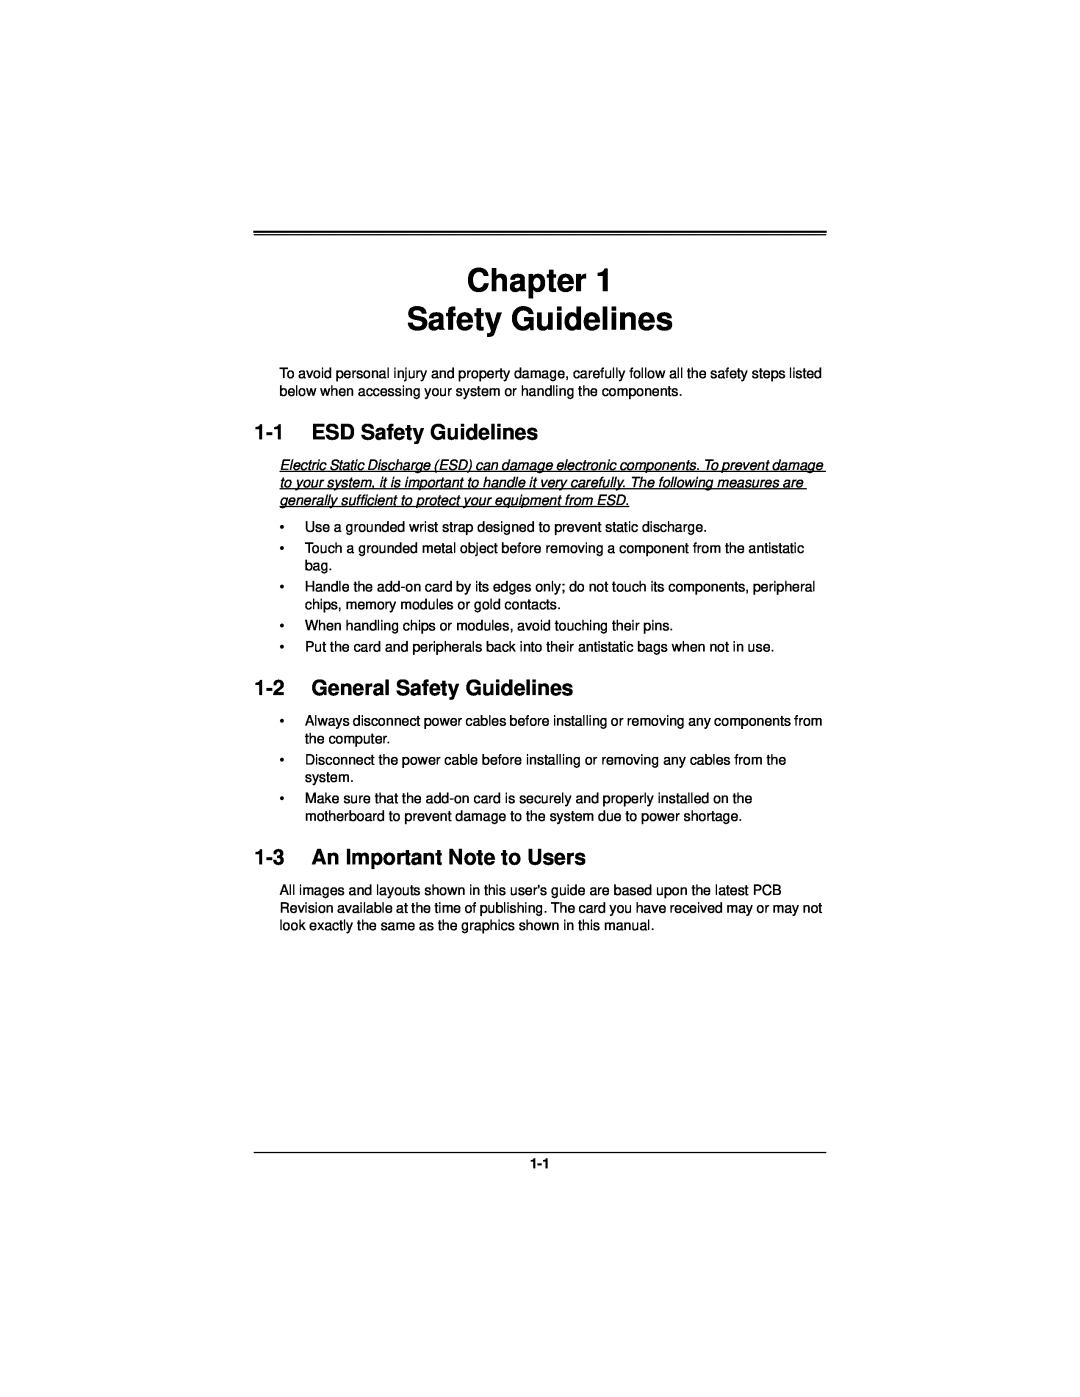 SUPER MICRO Computer AOC-R1UG-IBQ manual Chapter Safety Guidelines, ESD Safety Guidelines, General Safety Guidelines 